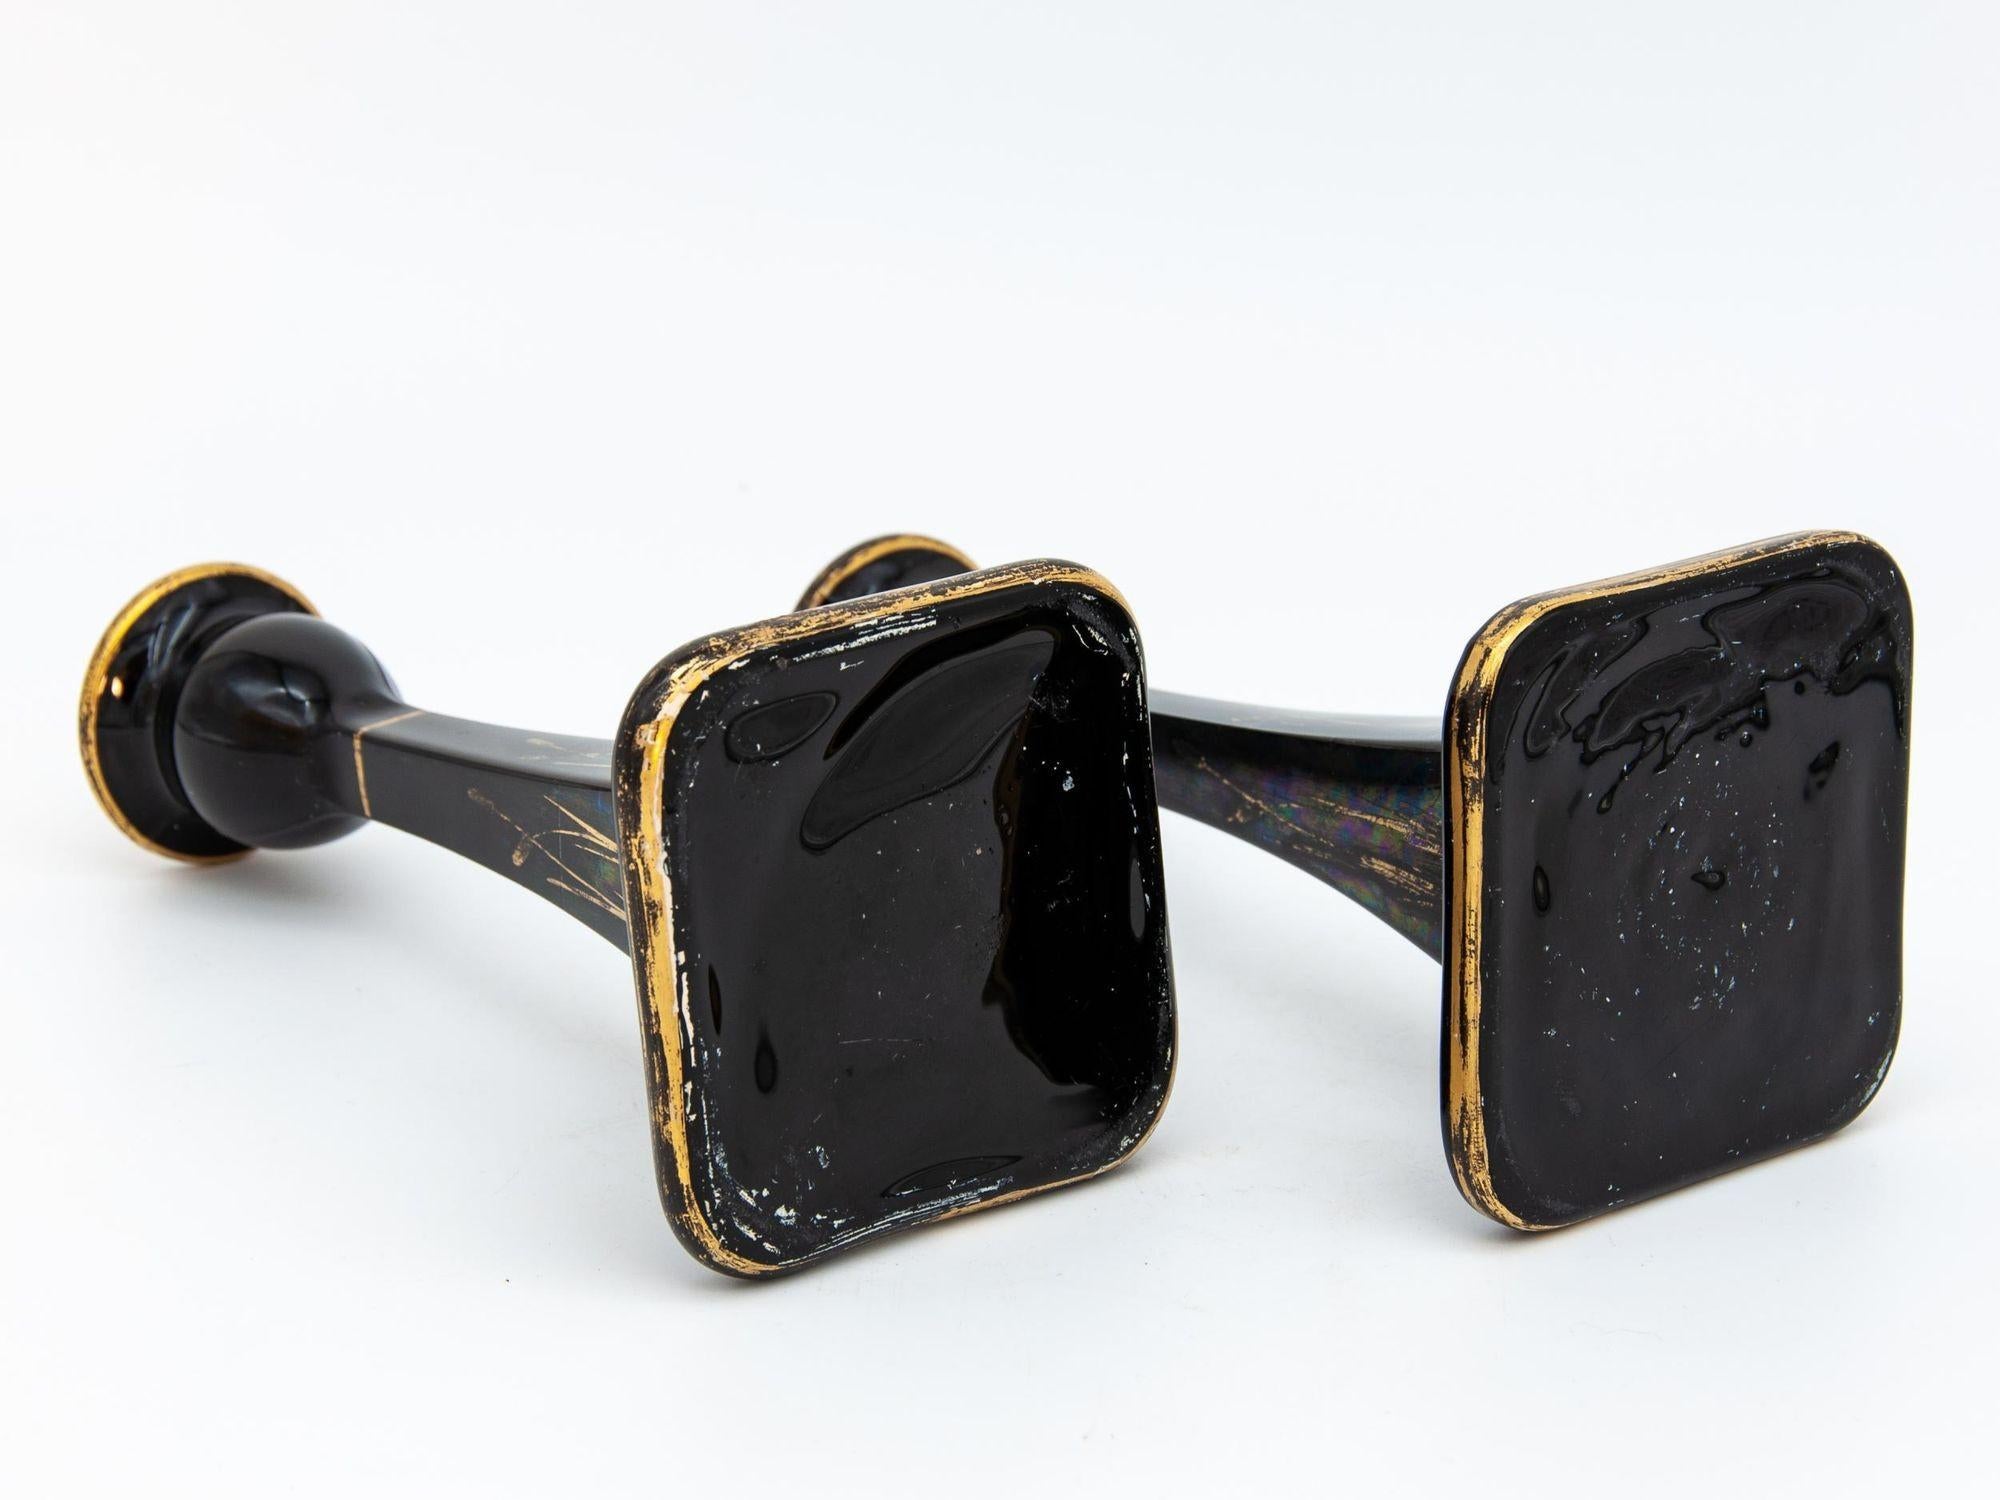 1970s Black & Gold Candle Holders, Pair In Good Condition For Sale In South Salem, NY